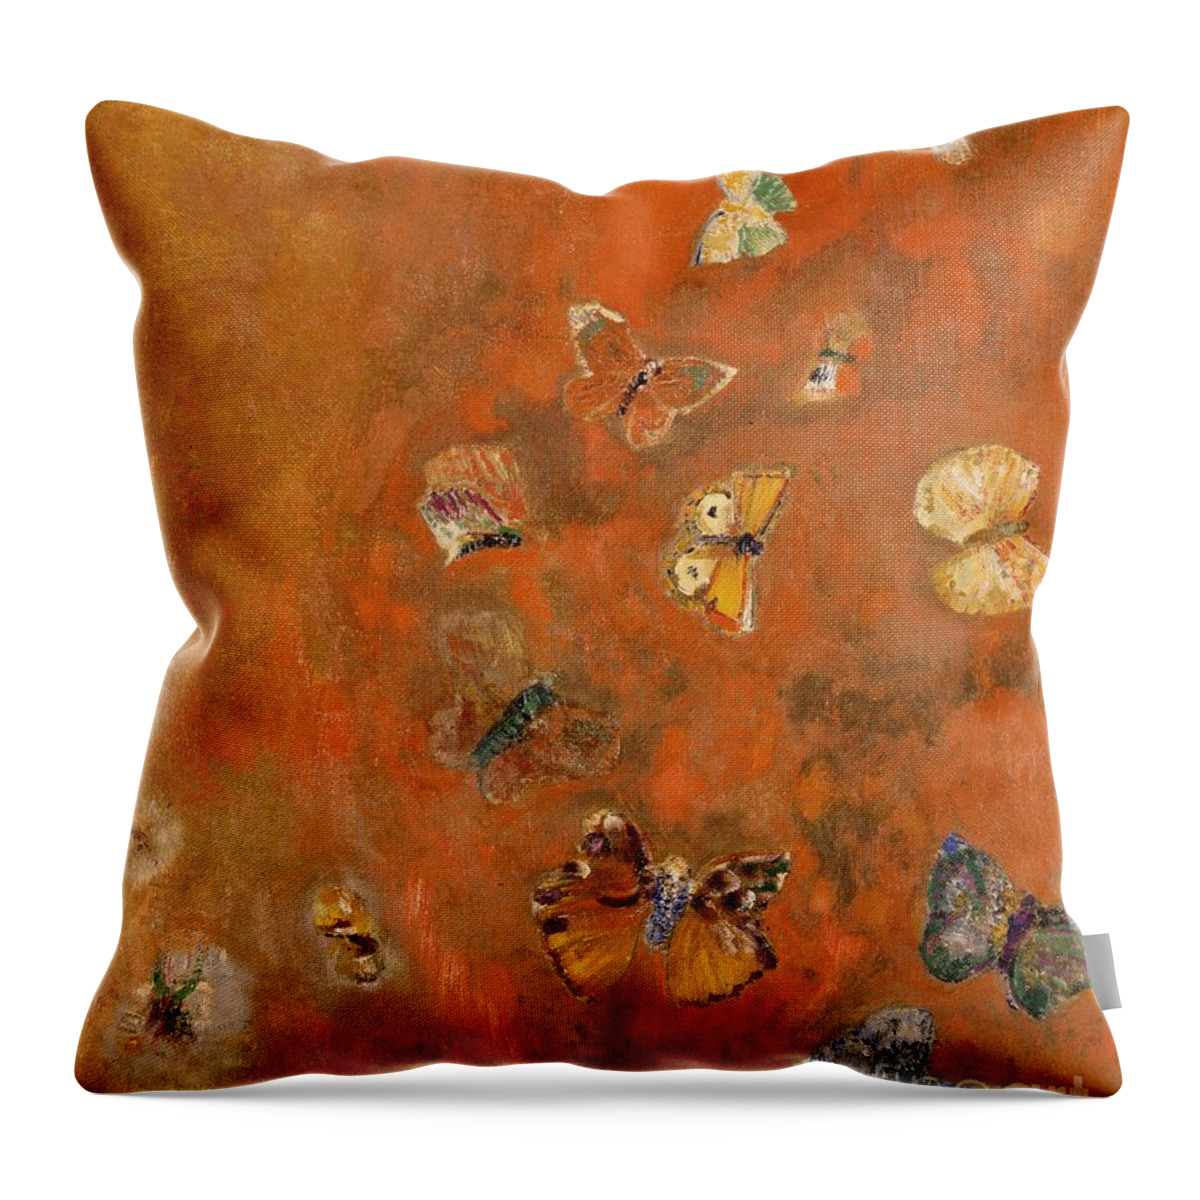 Evocation Throw Pillow featuring the painting Evocation of Butterflies by Odilon Redon